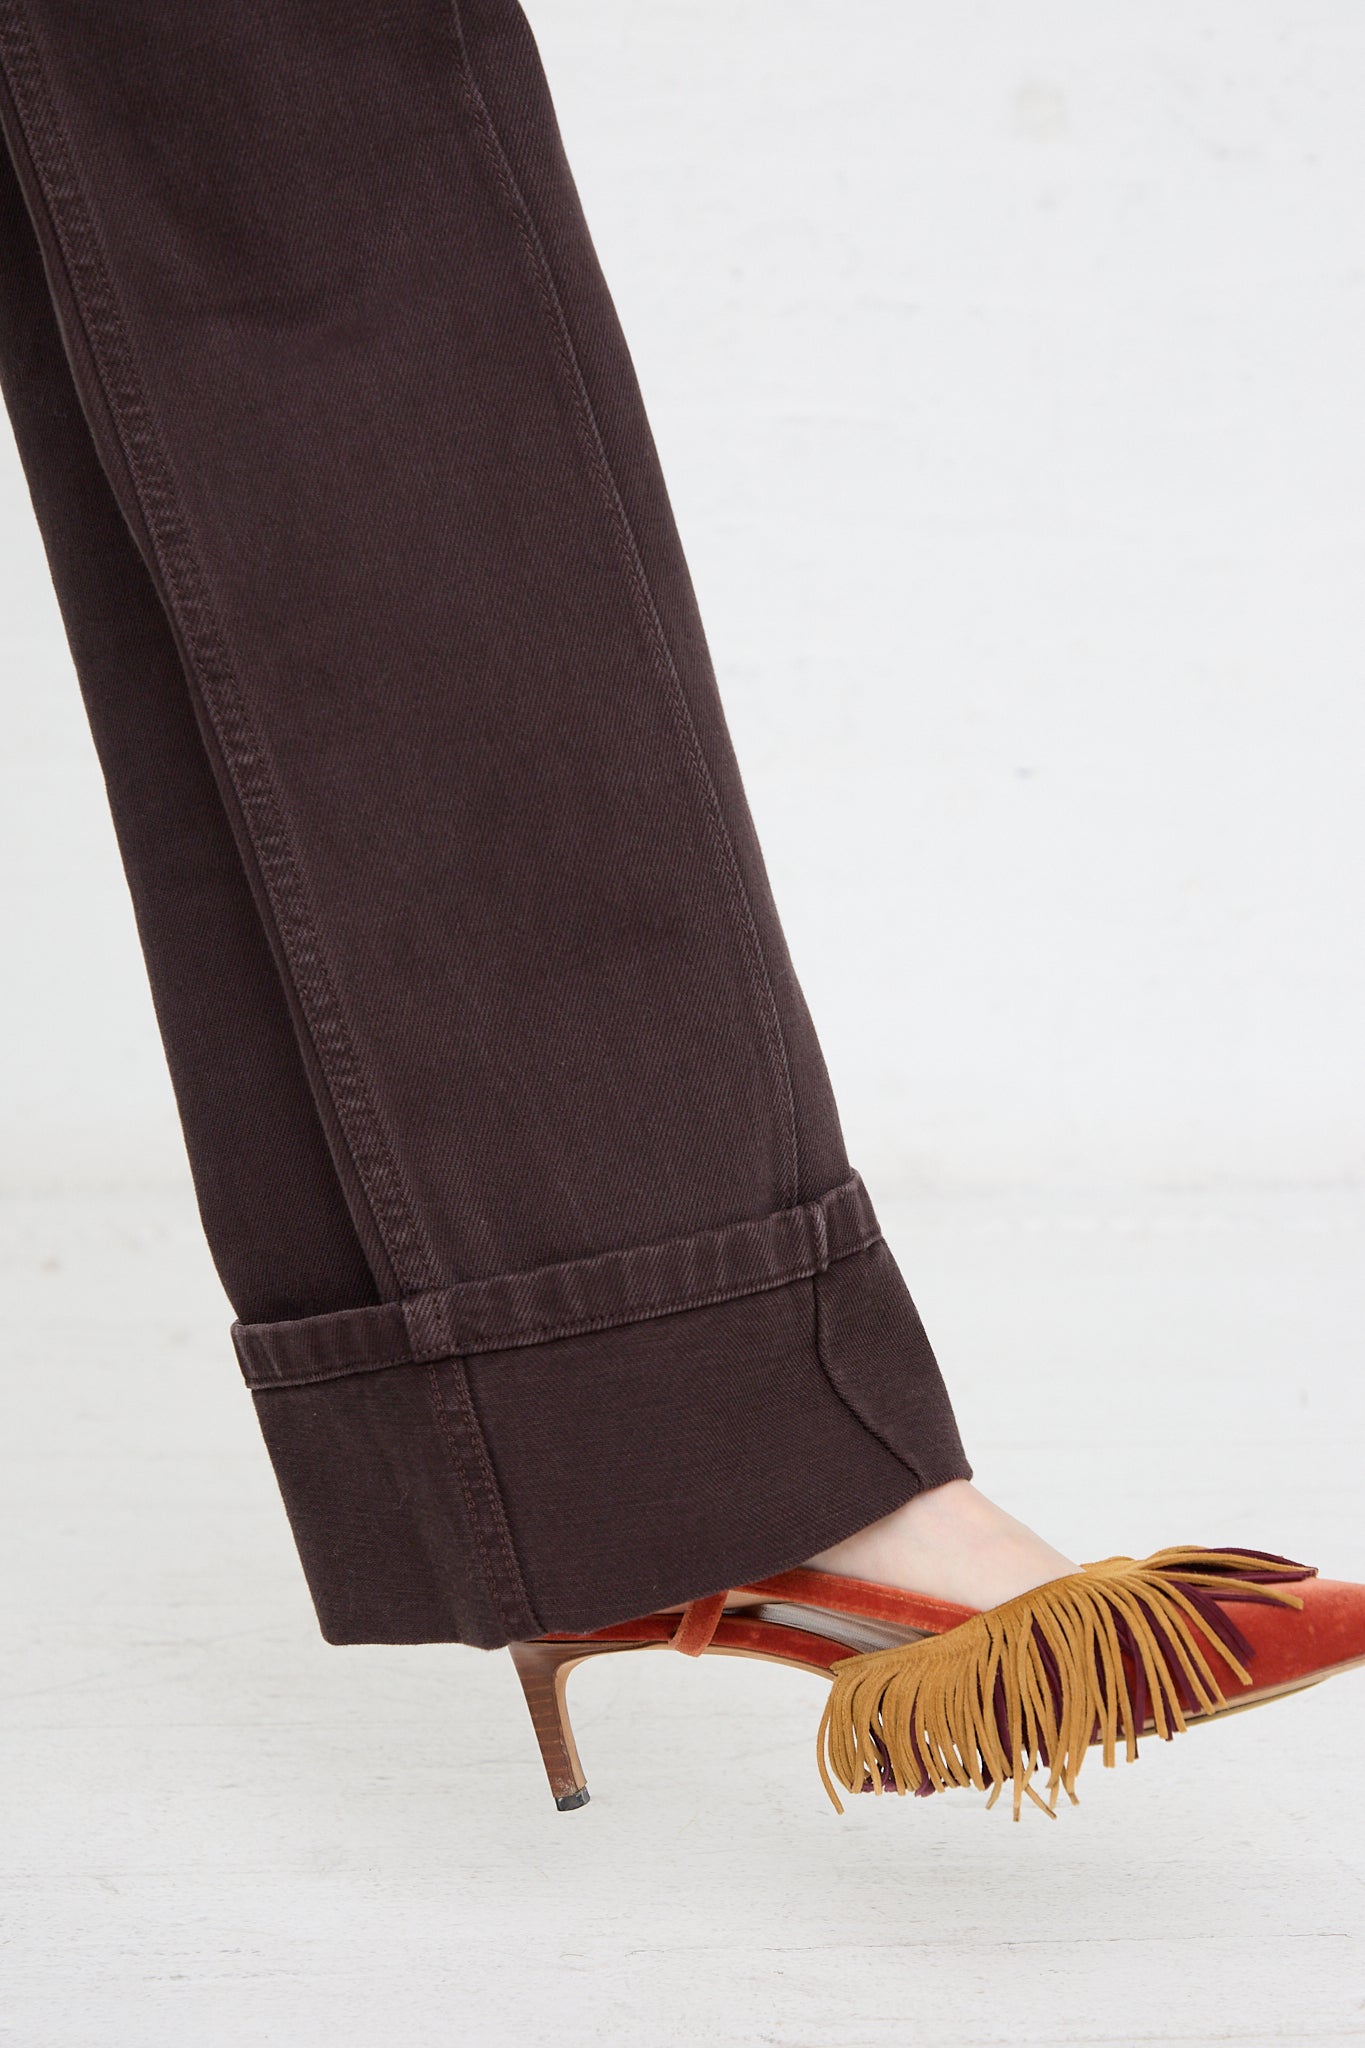 A woman's feet in a pair of Ulla Johnson's Genevieve Jean in Mahogany Wash with fringes.